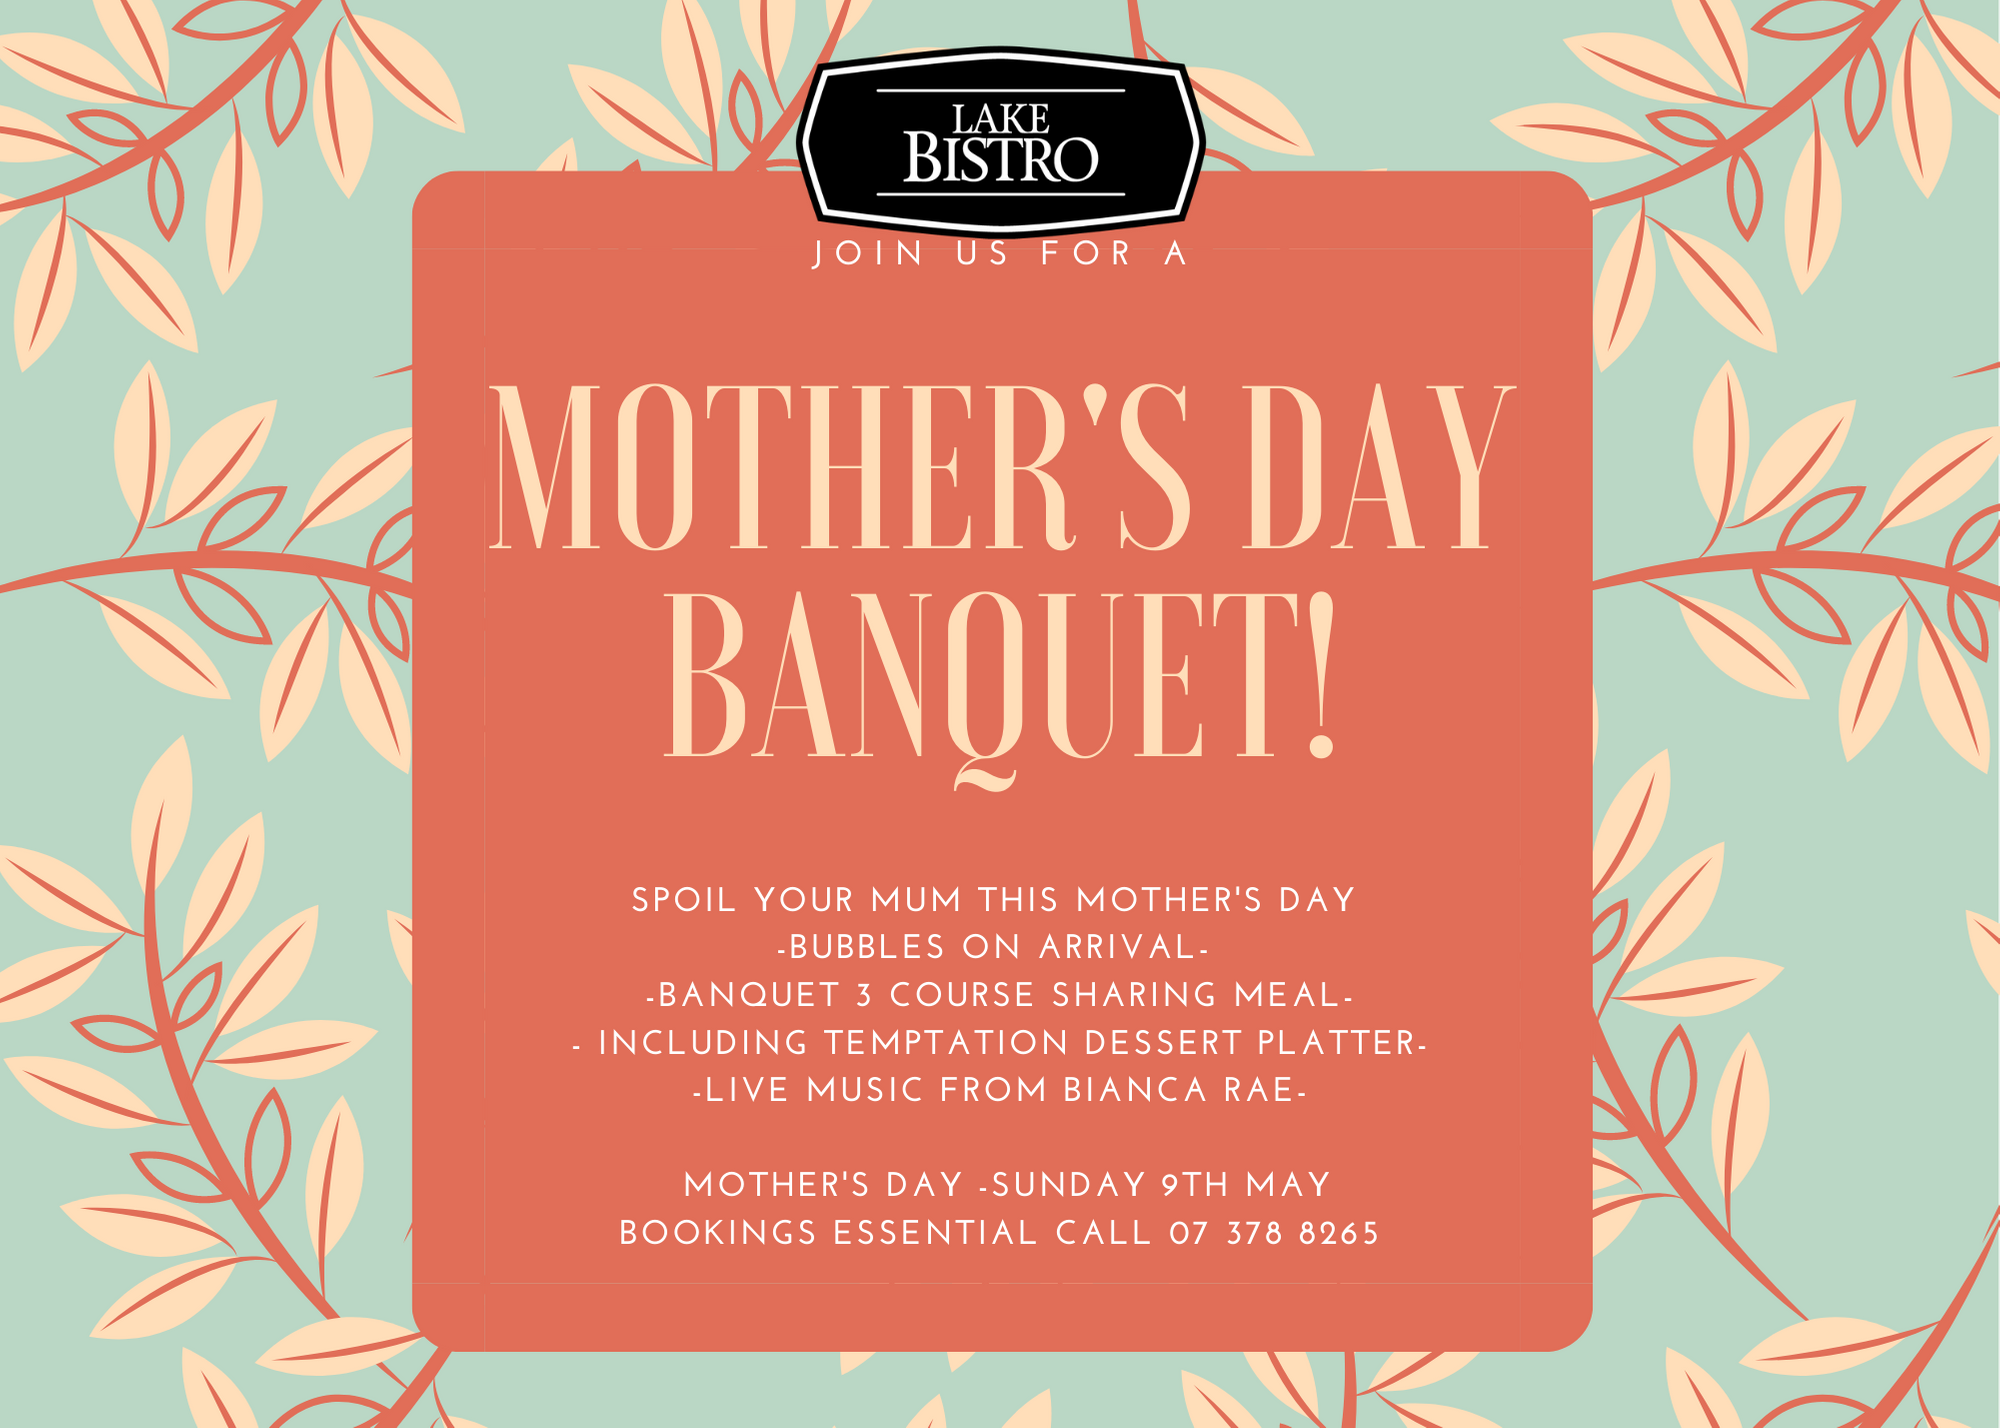 Treat Mum this Mother's Day, with a Lake Bistro Banquet